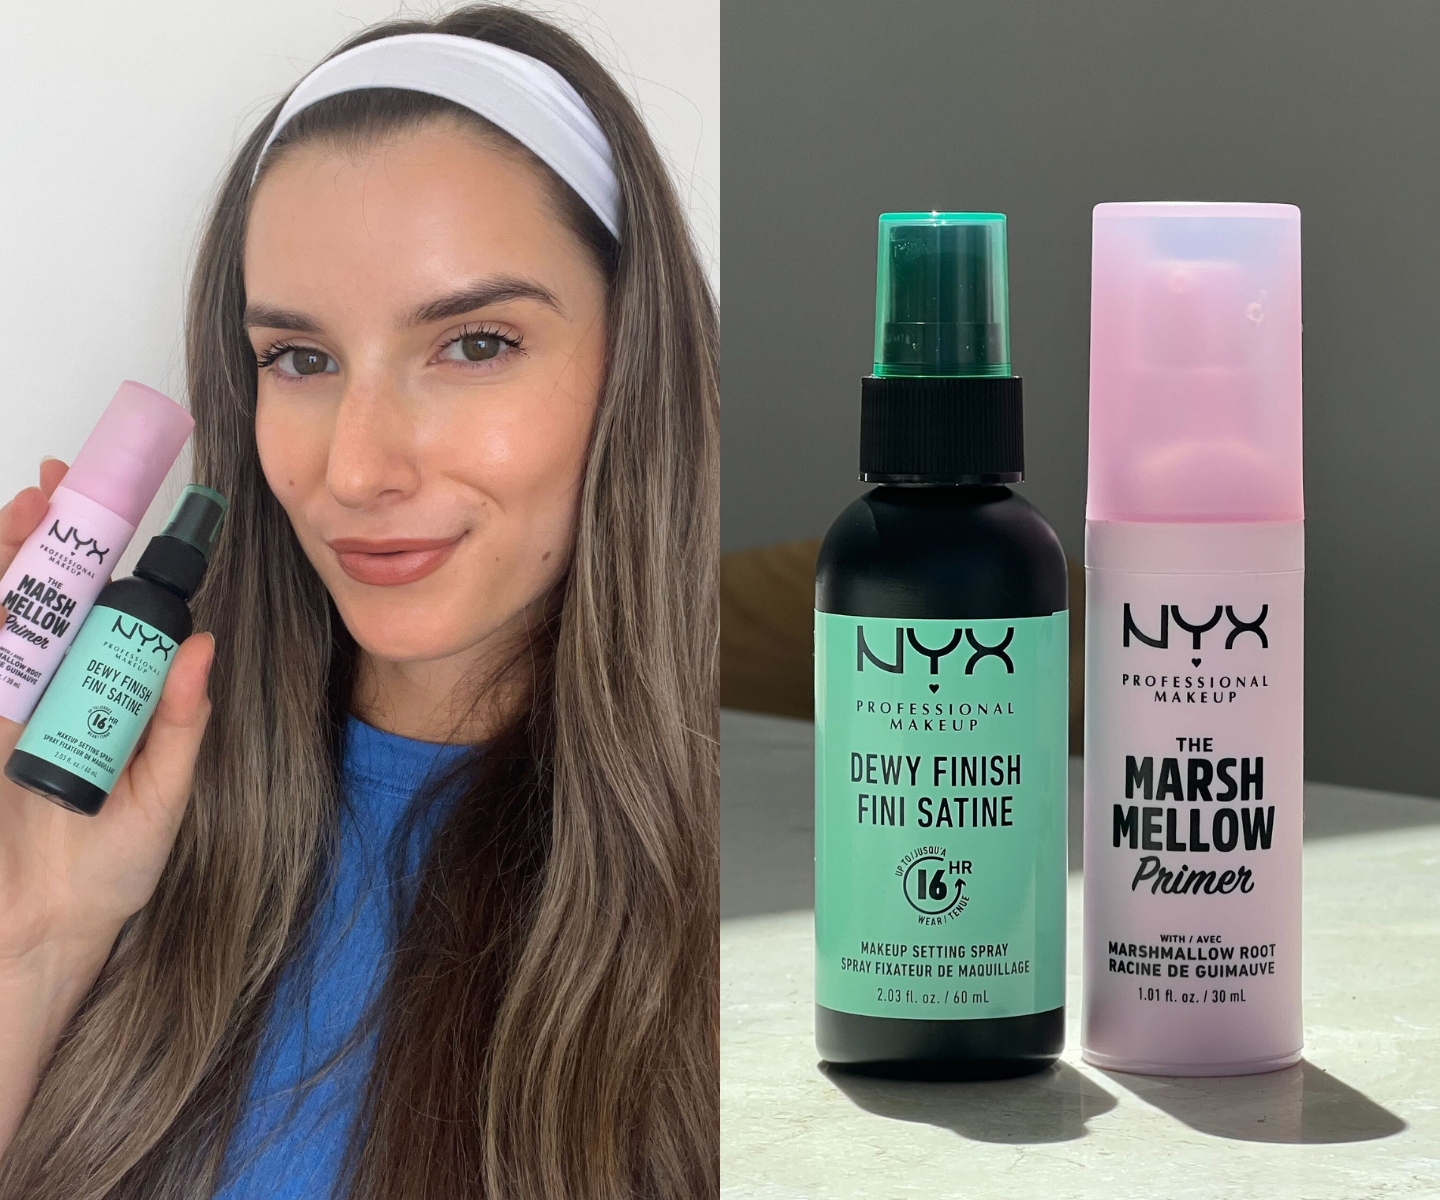 The Two You for Glowy That Products Lasts NYX Longer Need Makeup